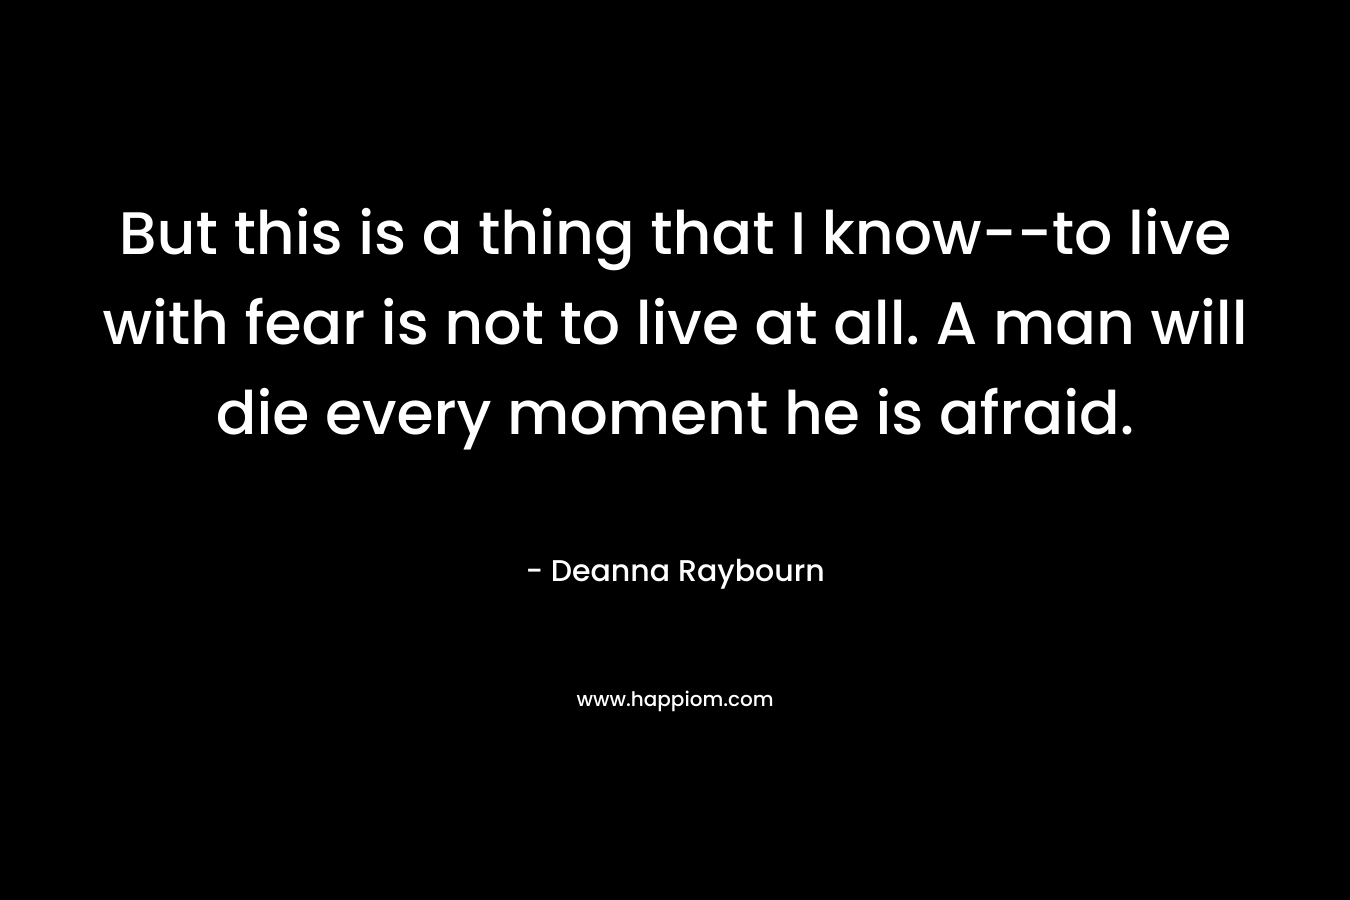 But this is a thing that I know--to live with fear is not to live at all. A man will die every moment he is afraid.